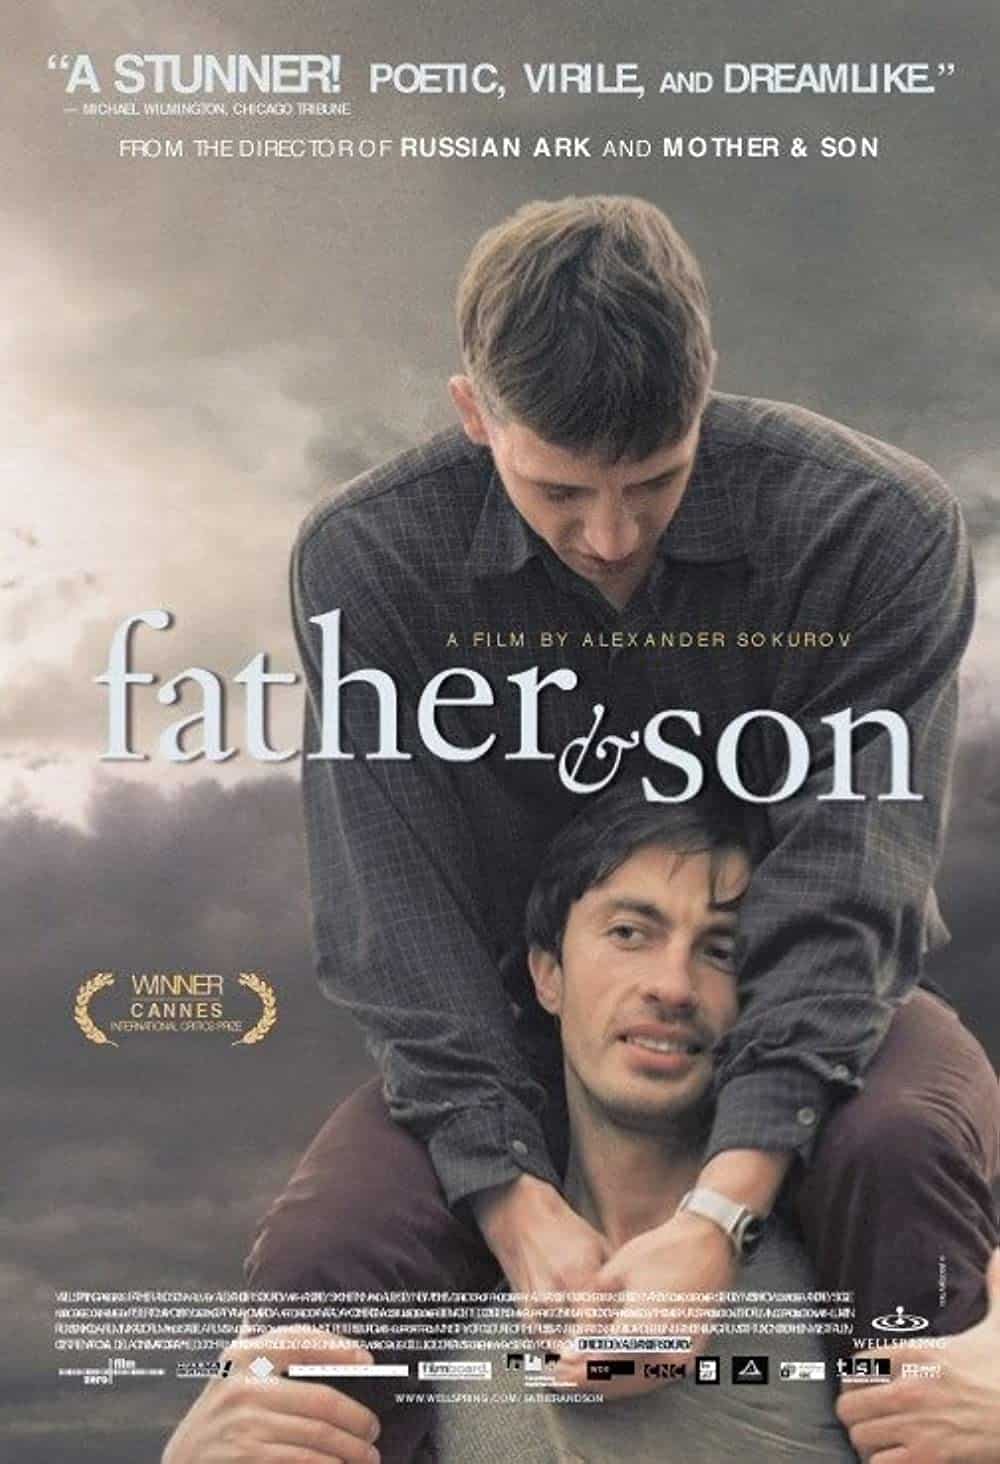 Father and Son (2003) Best Father-Son Movies to Add in Your Watchlist